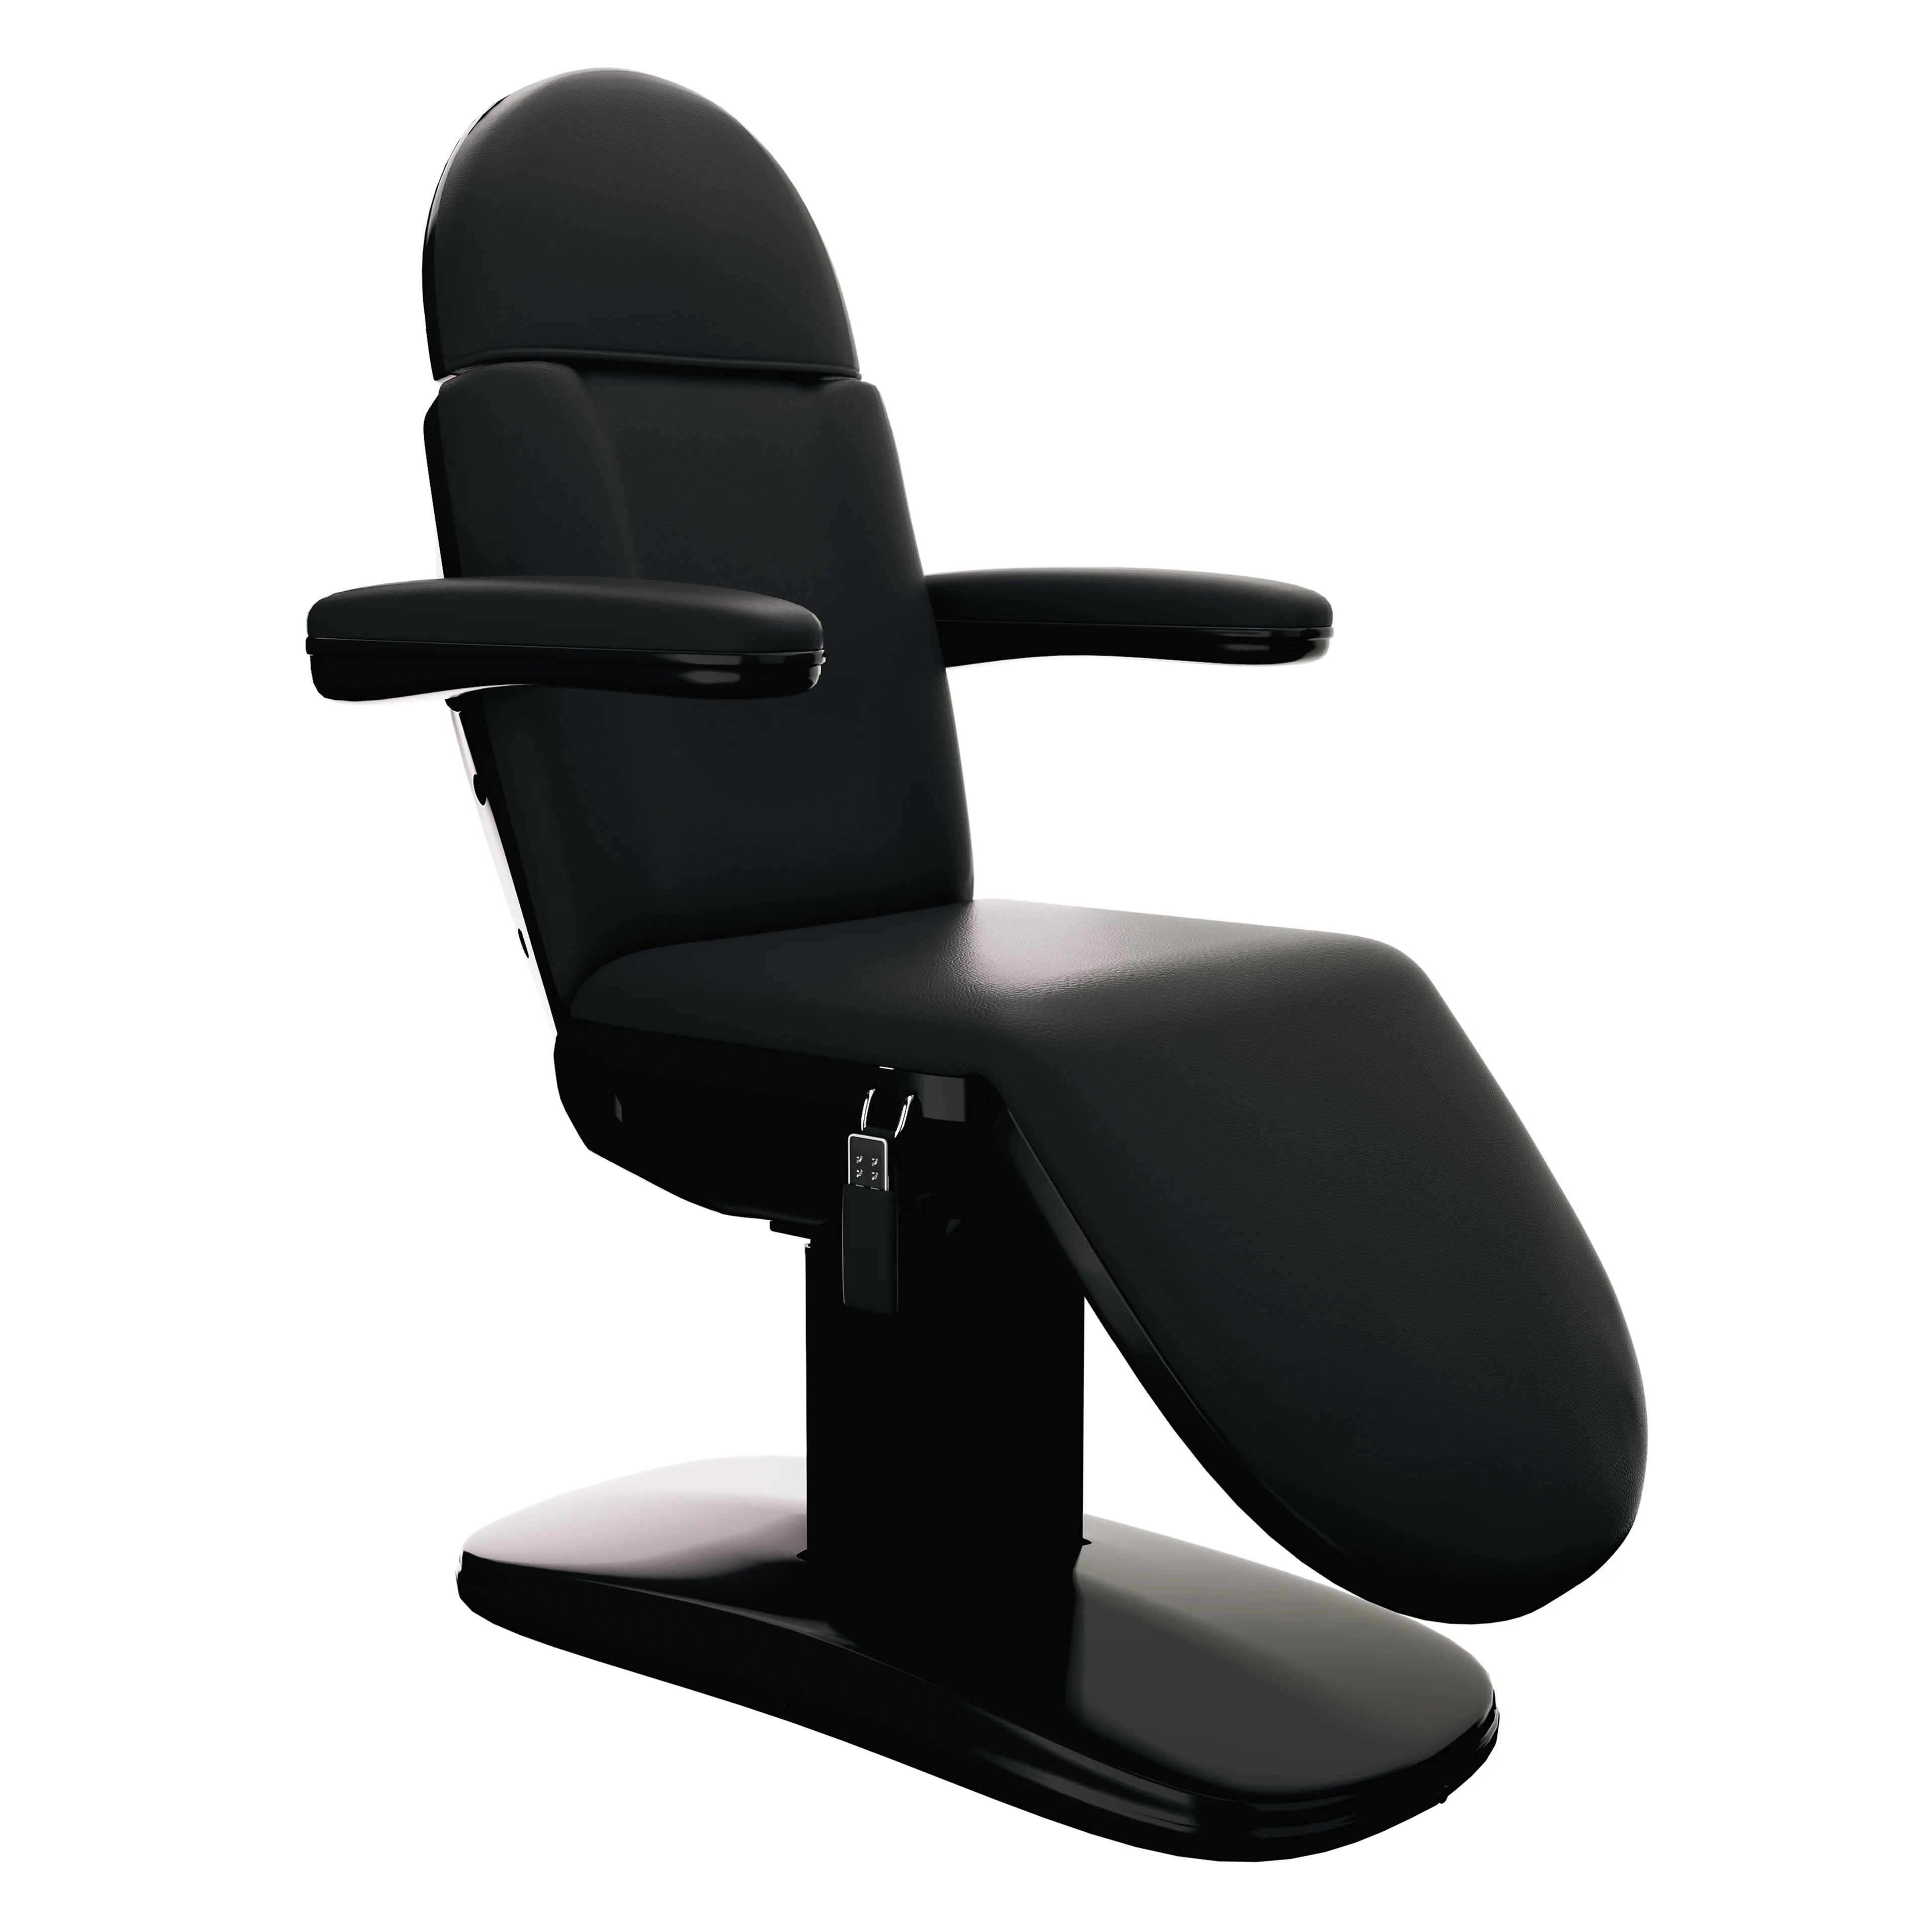 SpaMarc . Benefic (ALL Black) . 4 Motor Spa Treatment Chair/Bed . (Wireless Remote)